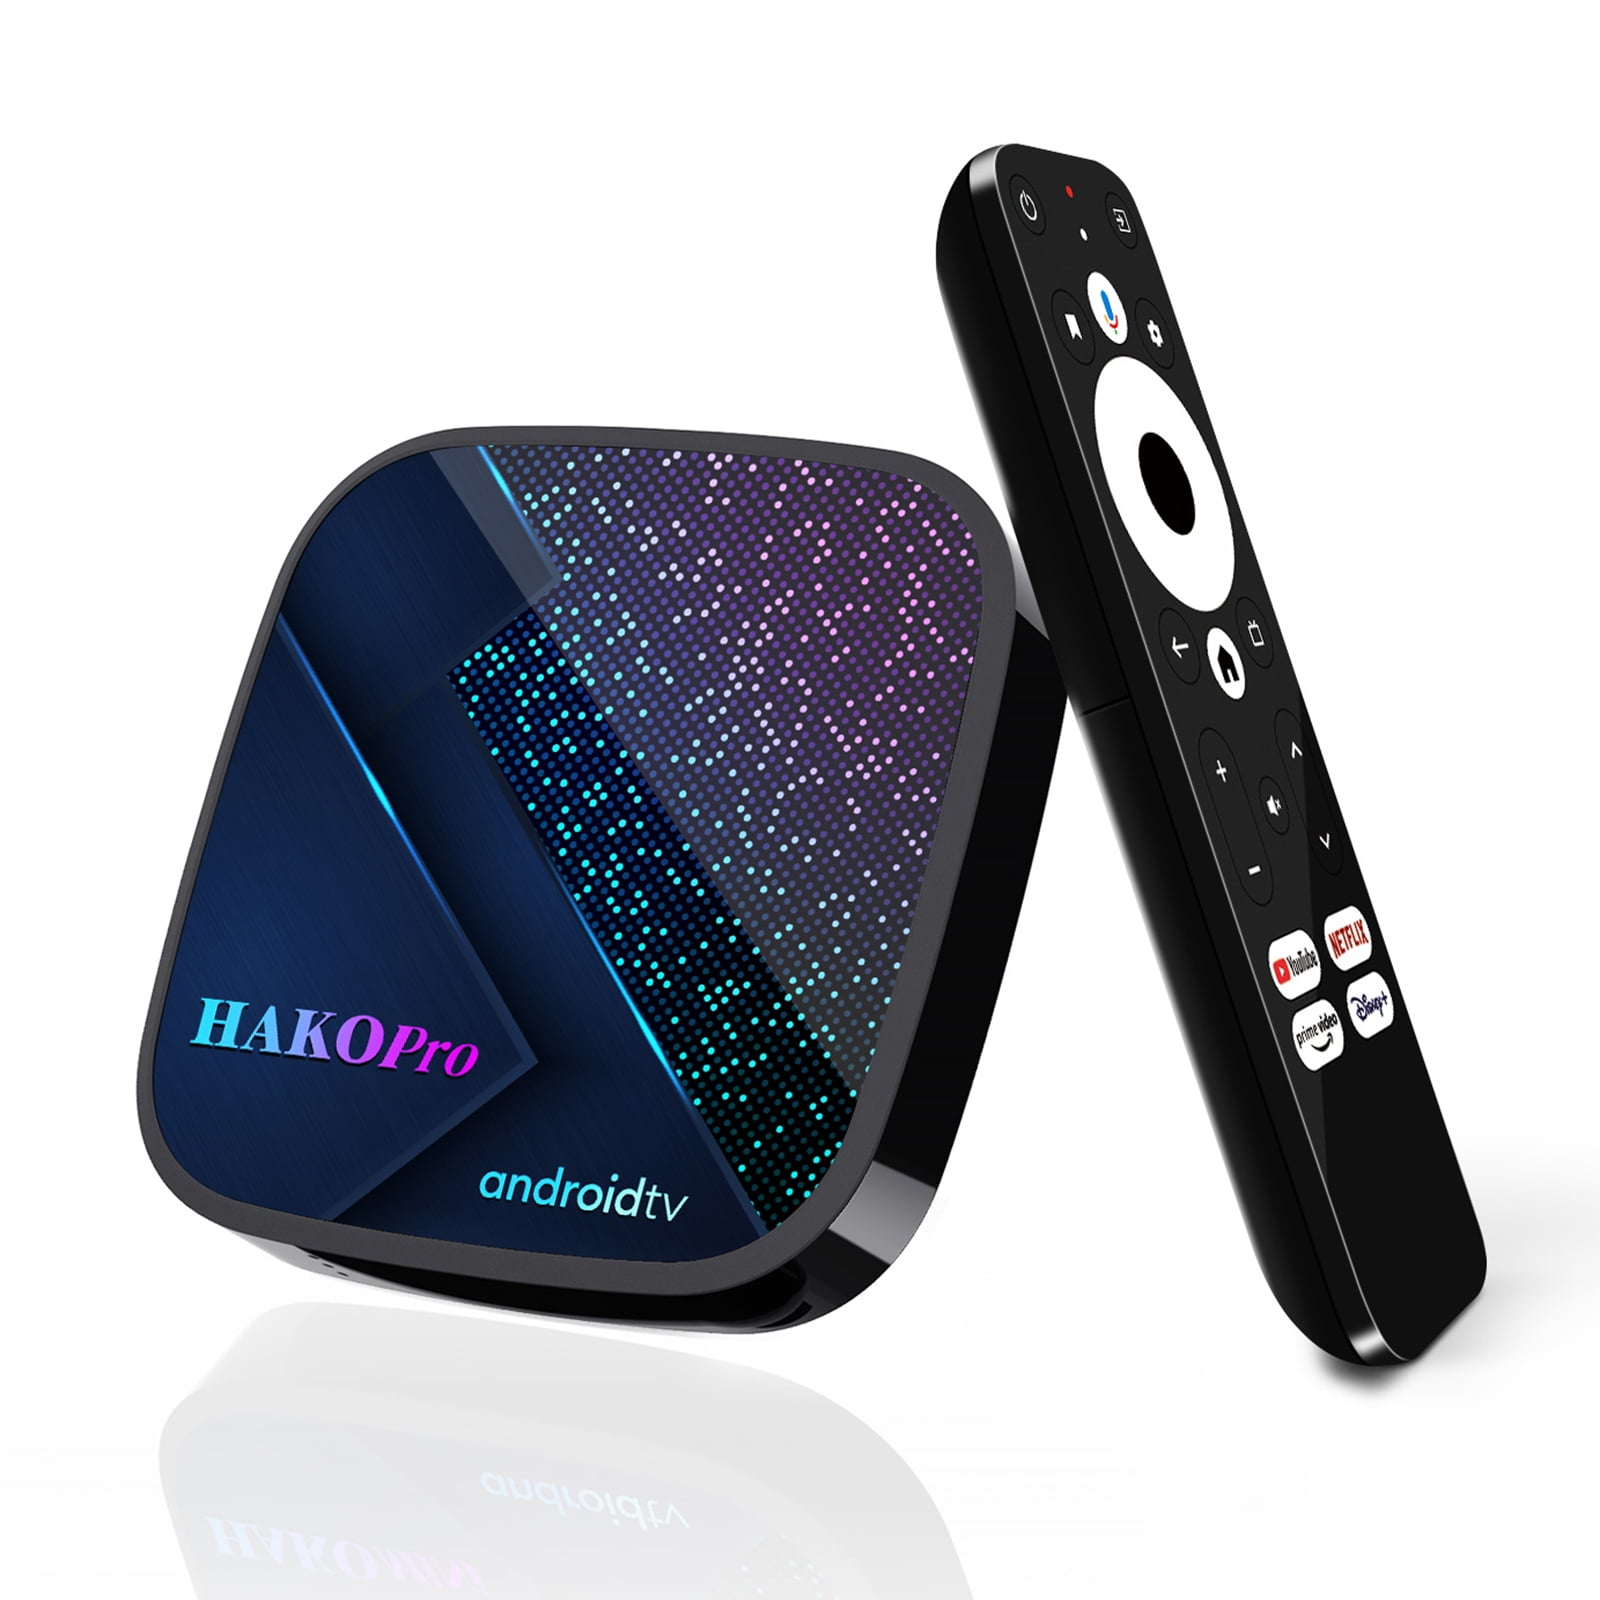 Android 11 TV Box HAKO Pro Smart TV Box 2.4G/5G Dual WiFi BT 5.0 Amlogic  S905Y4-B Support Dolby Audio AV1, H.265, VP9, HDR 10+ Supports Netflix,  Prime